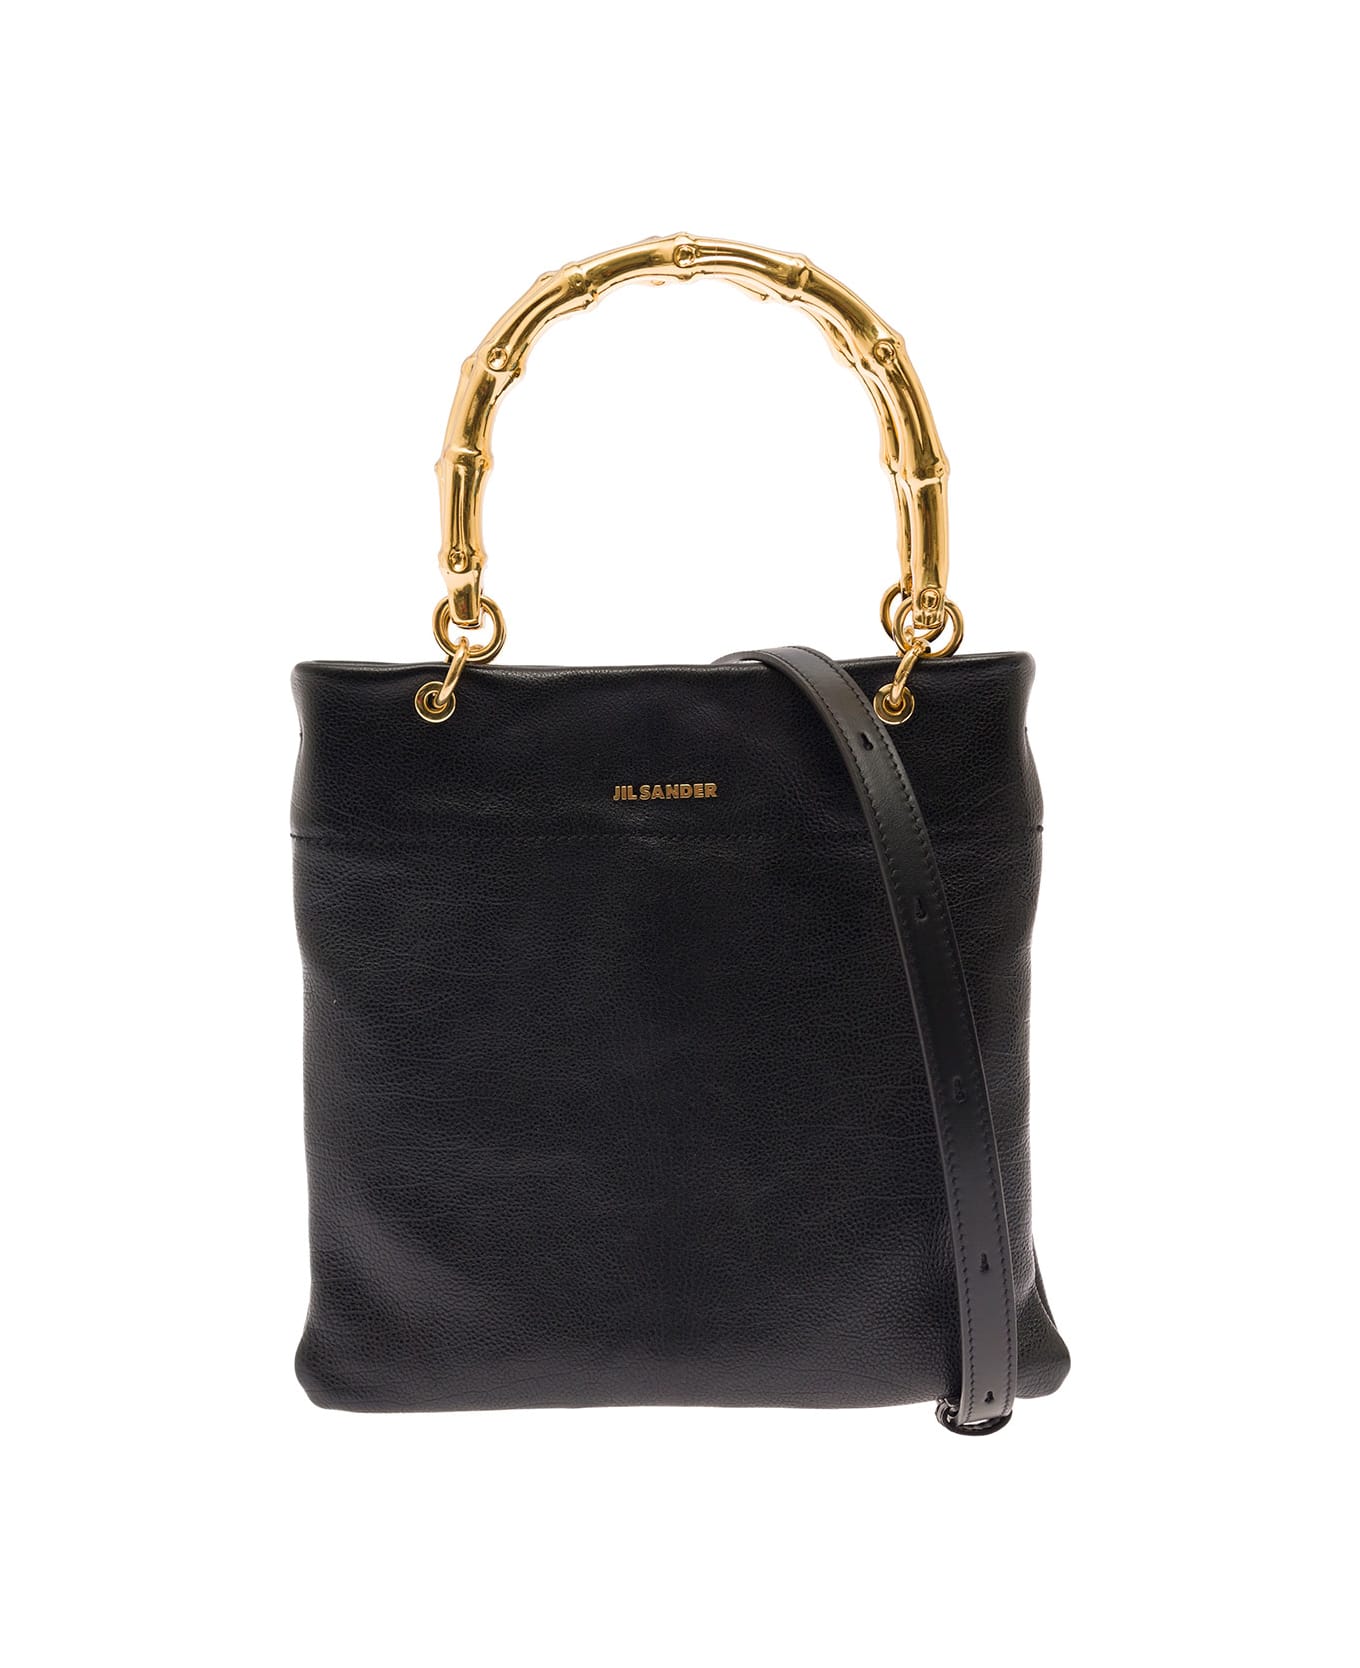 Jil Sander Blacktote Bag With Bamboo Handles In Leather Woman - Black